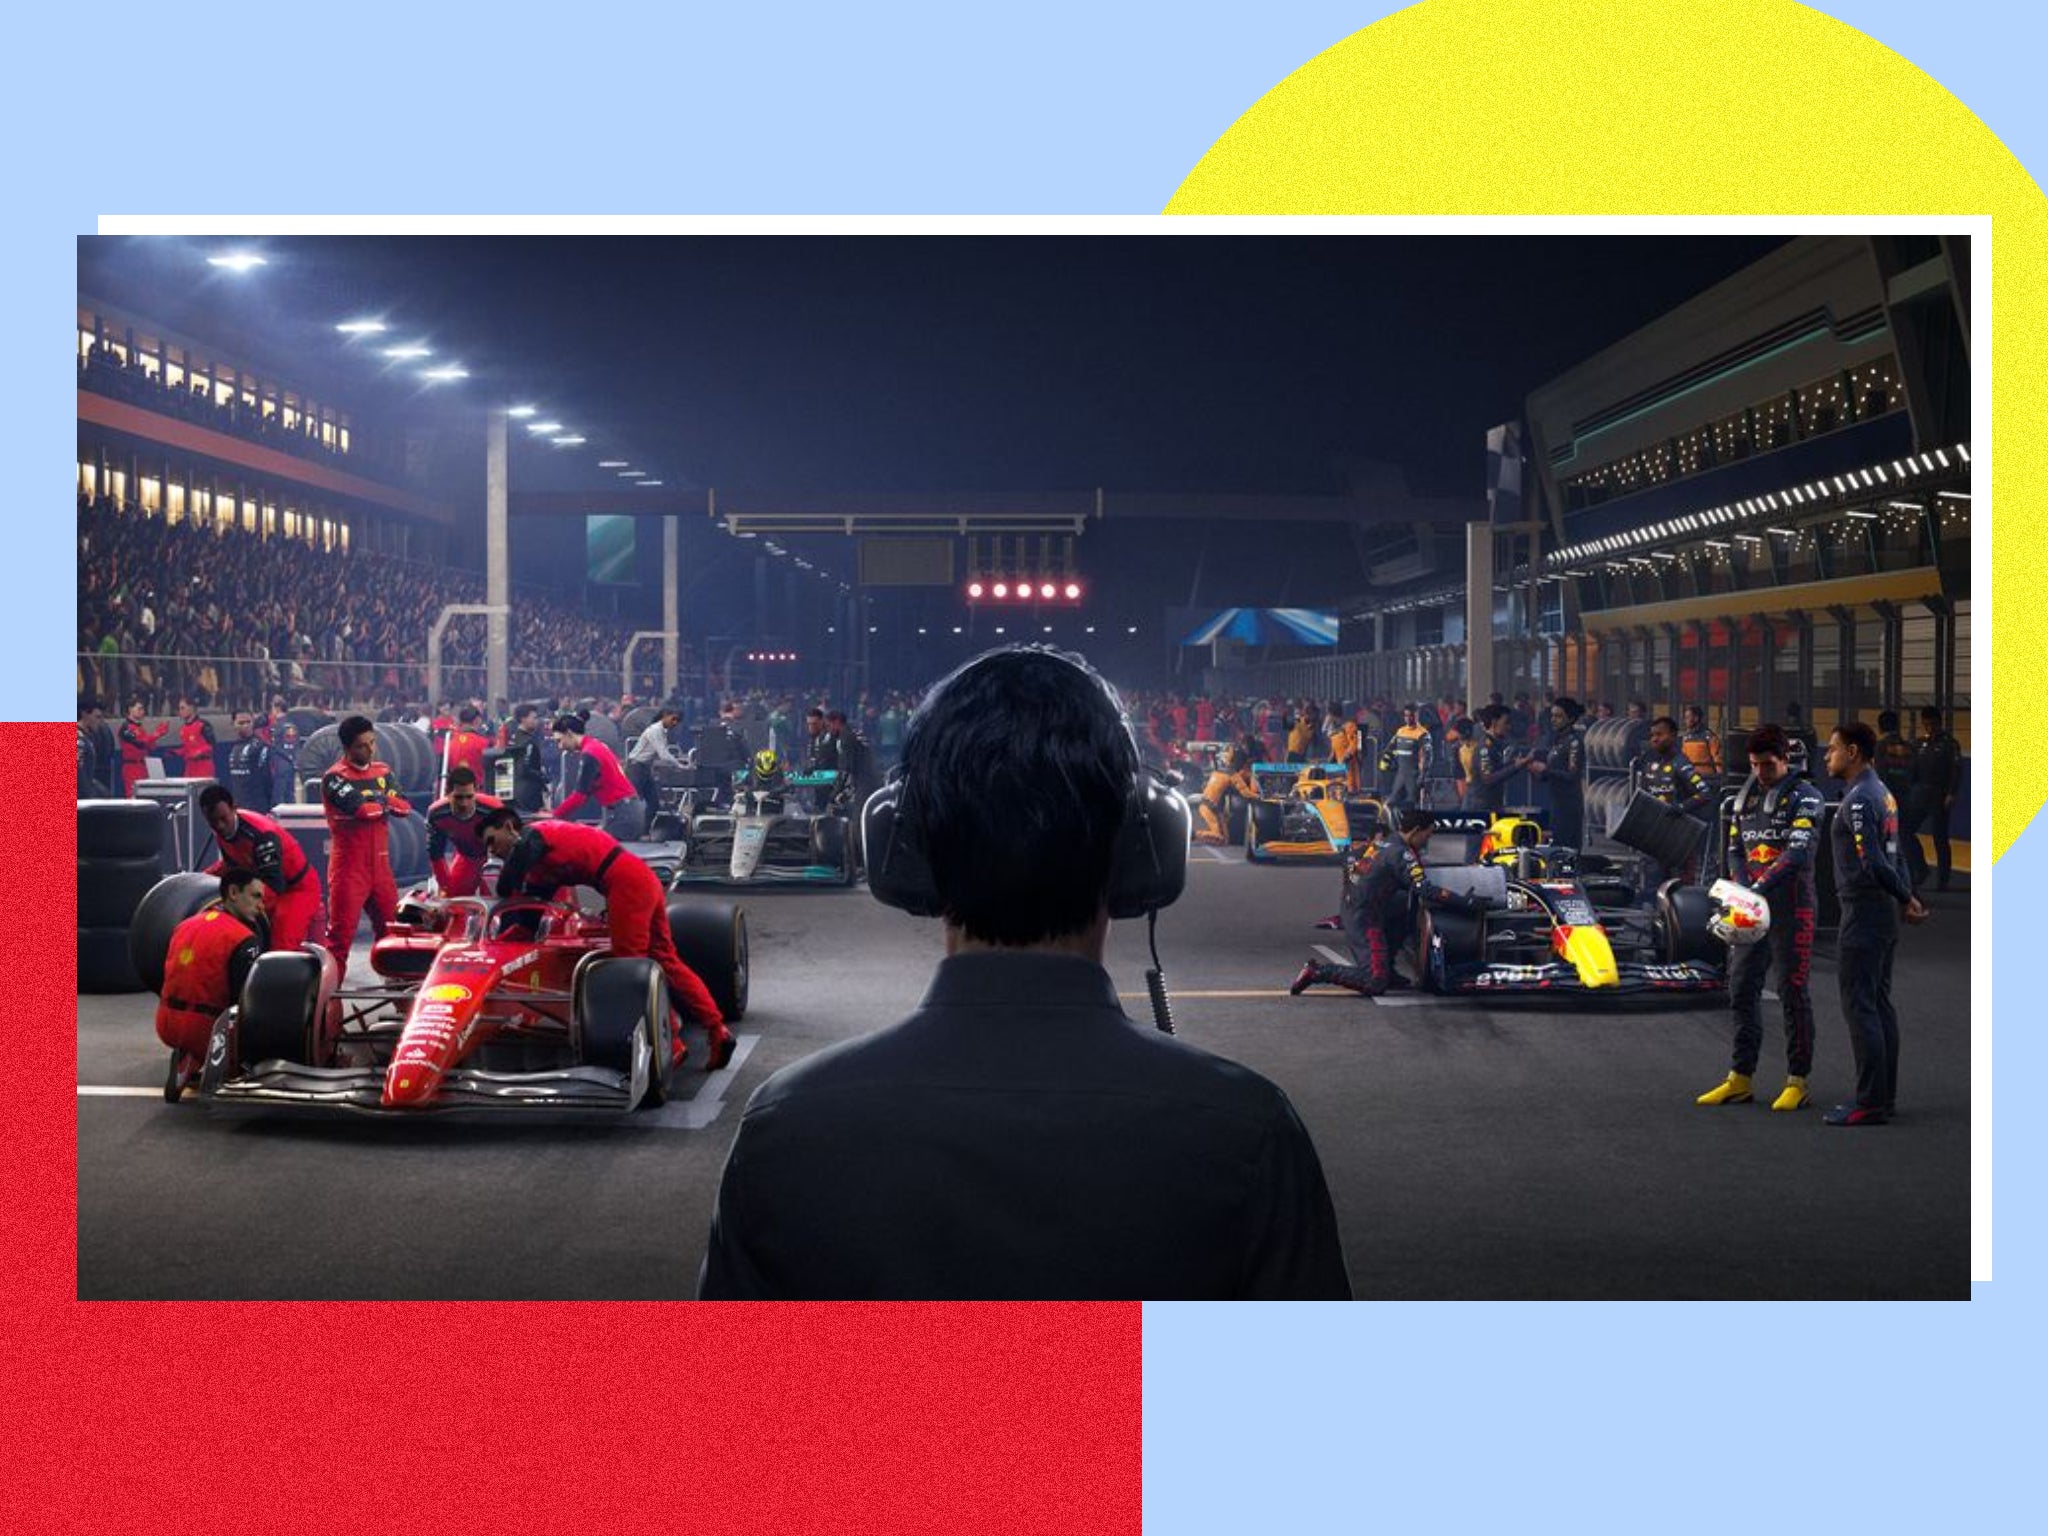 F1 Manager 2022 review, Is it worth playing on PC, Xbox, PS4 or PS5?